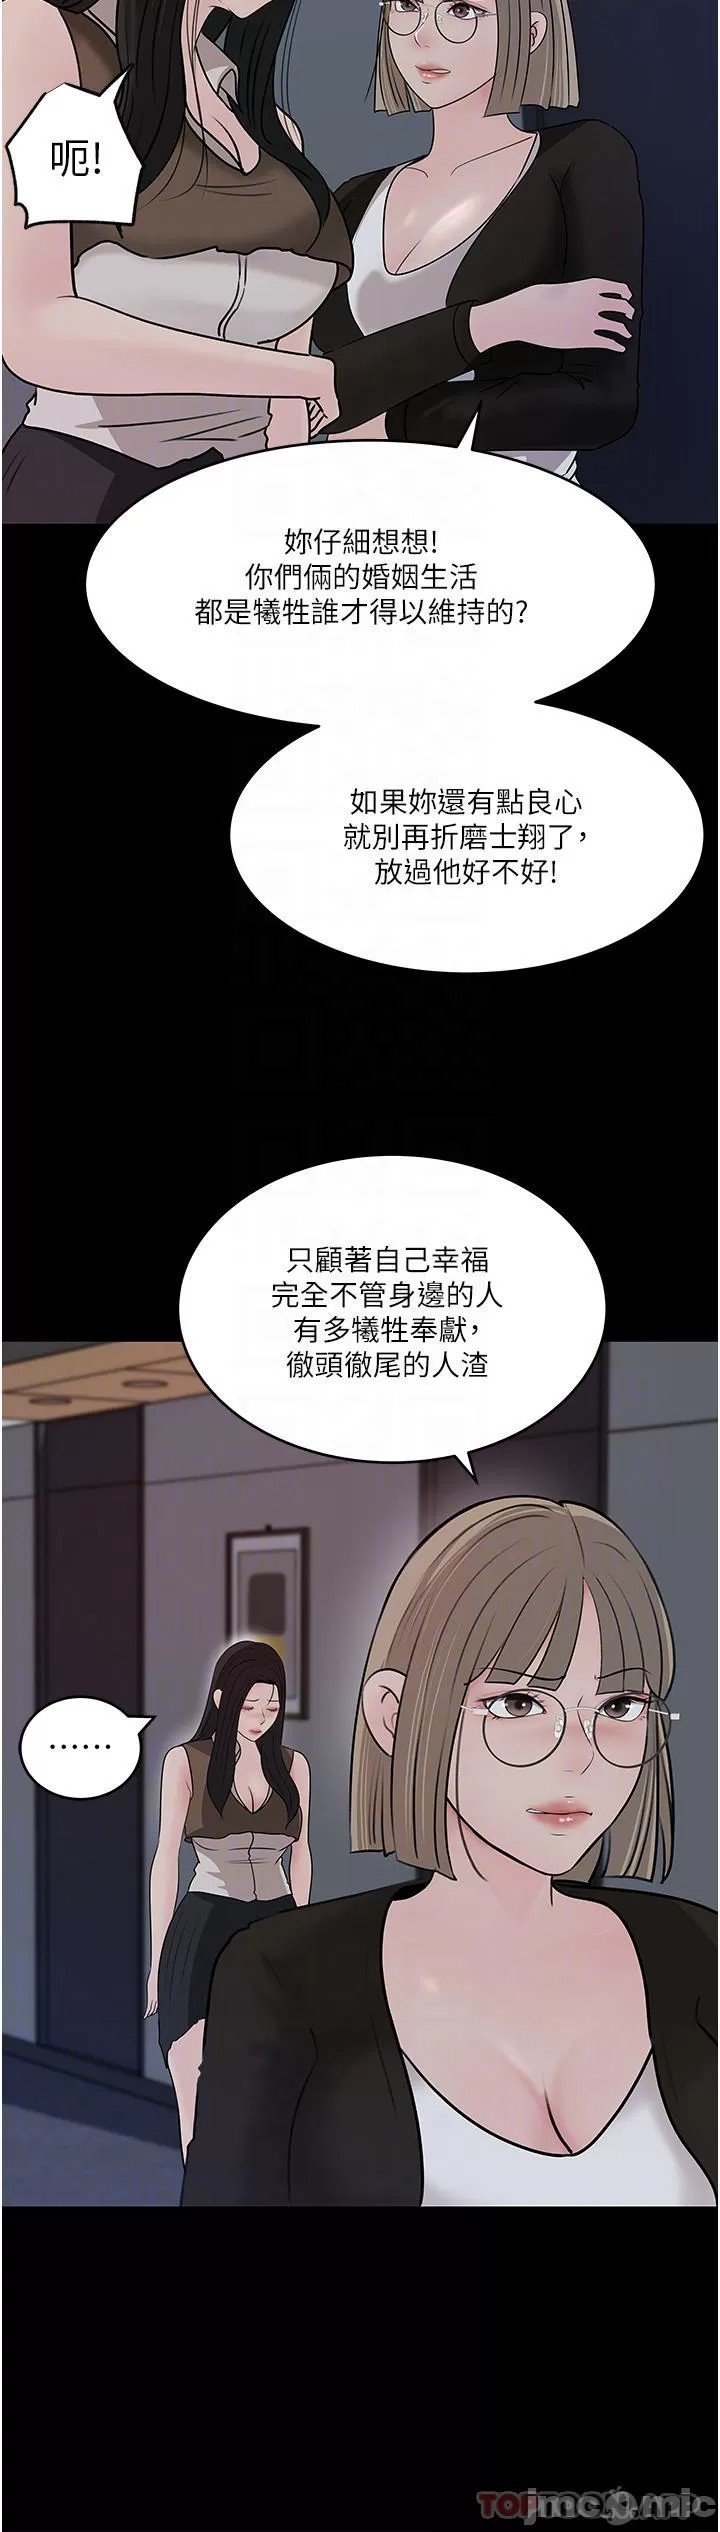 in-my-sister-in-law-raw-chap-45-17